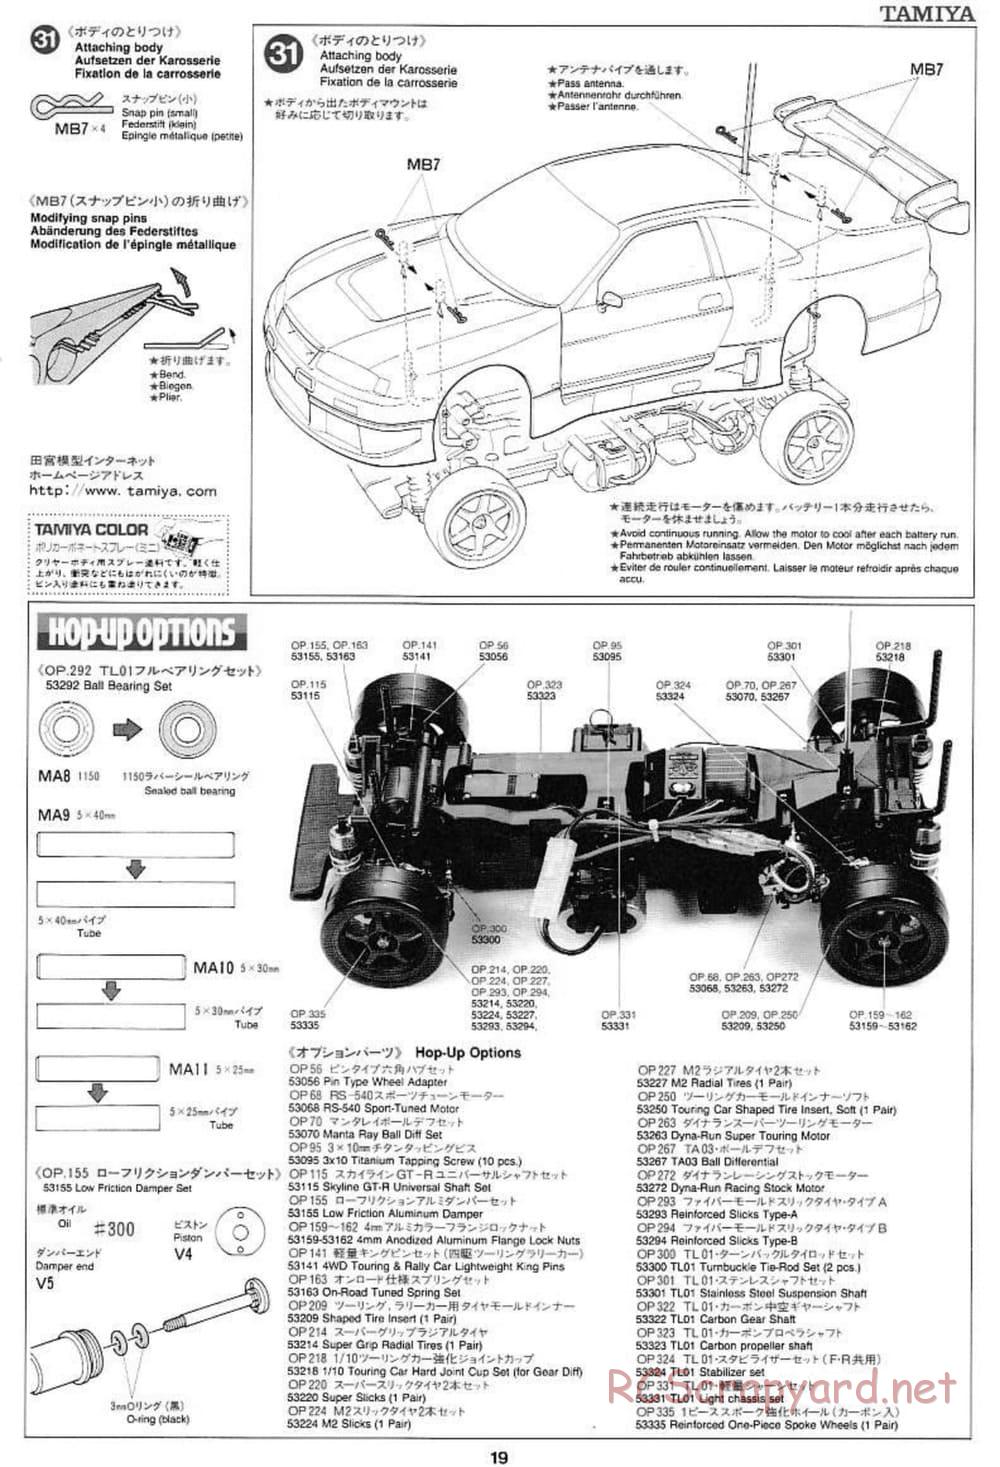 Tamiya - Pennzoil Nismo GT-R - TL-01 Chassis - Manual - Page 19